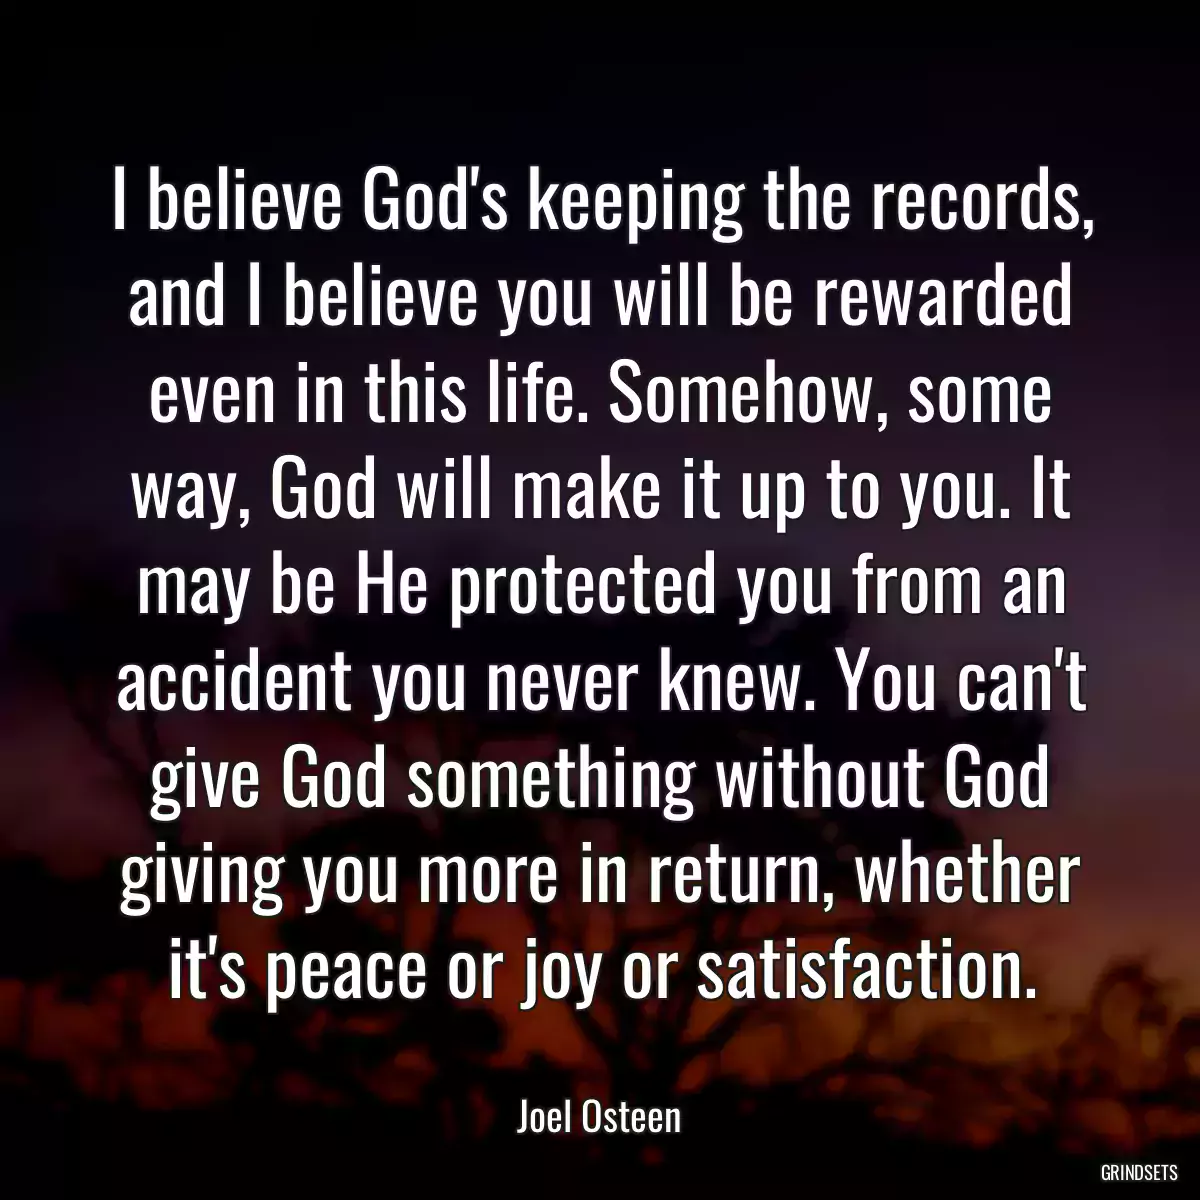 I believe God\'s keeping the records, and I believe you will be rewarded even in this life. Somehow, some way, God will make it up to you. It may be He protected you from an accident you never knew. You can\'t give God something without God giving you more in return, whether it\'s peace or joy or satisfaction.